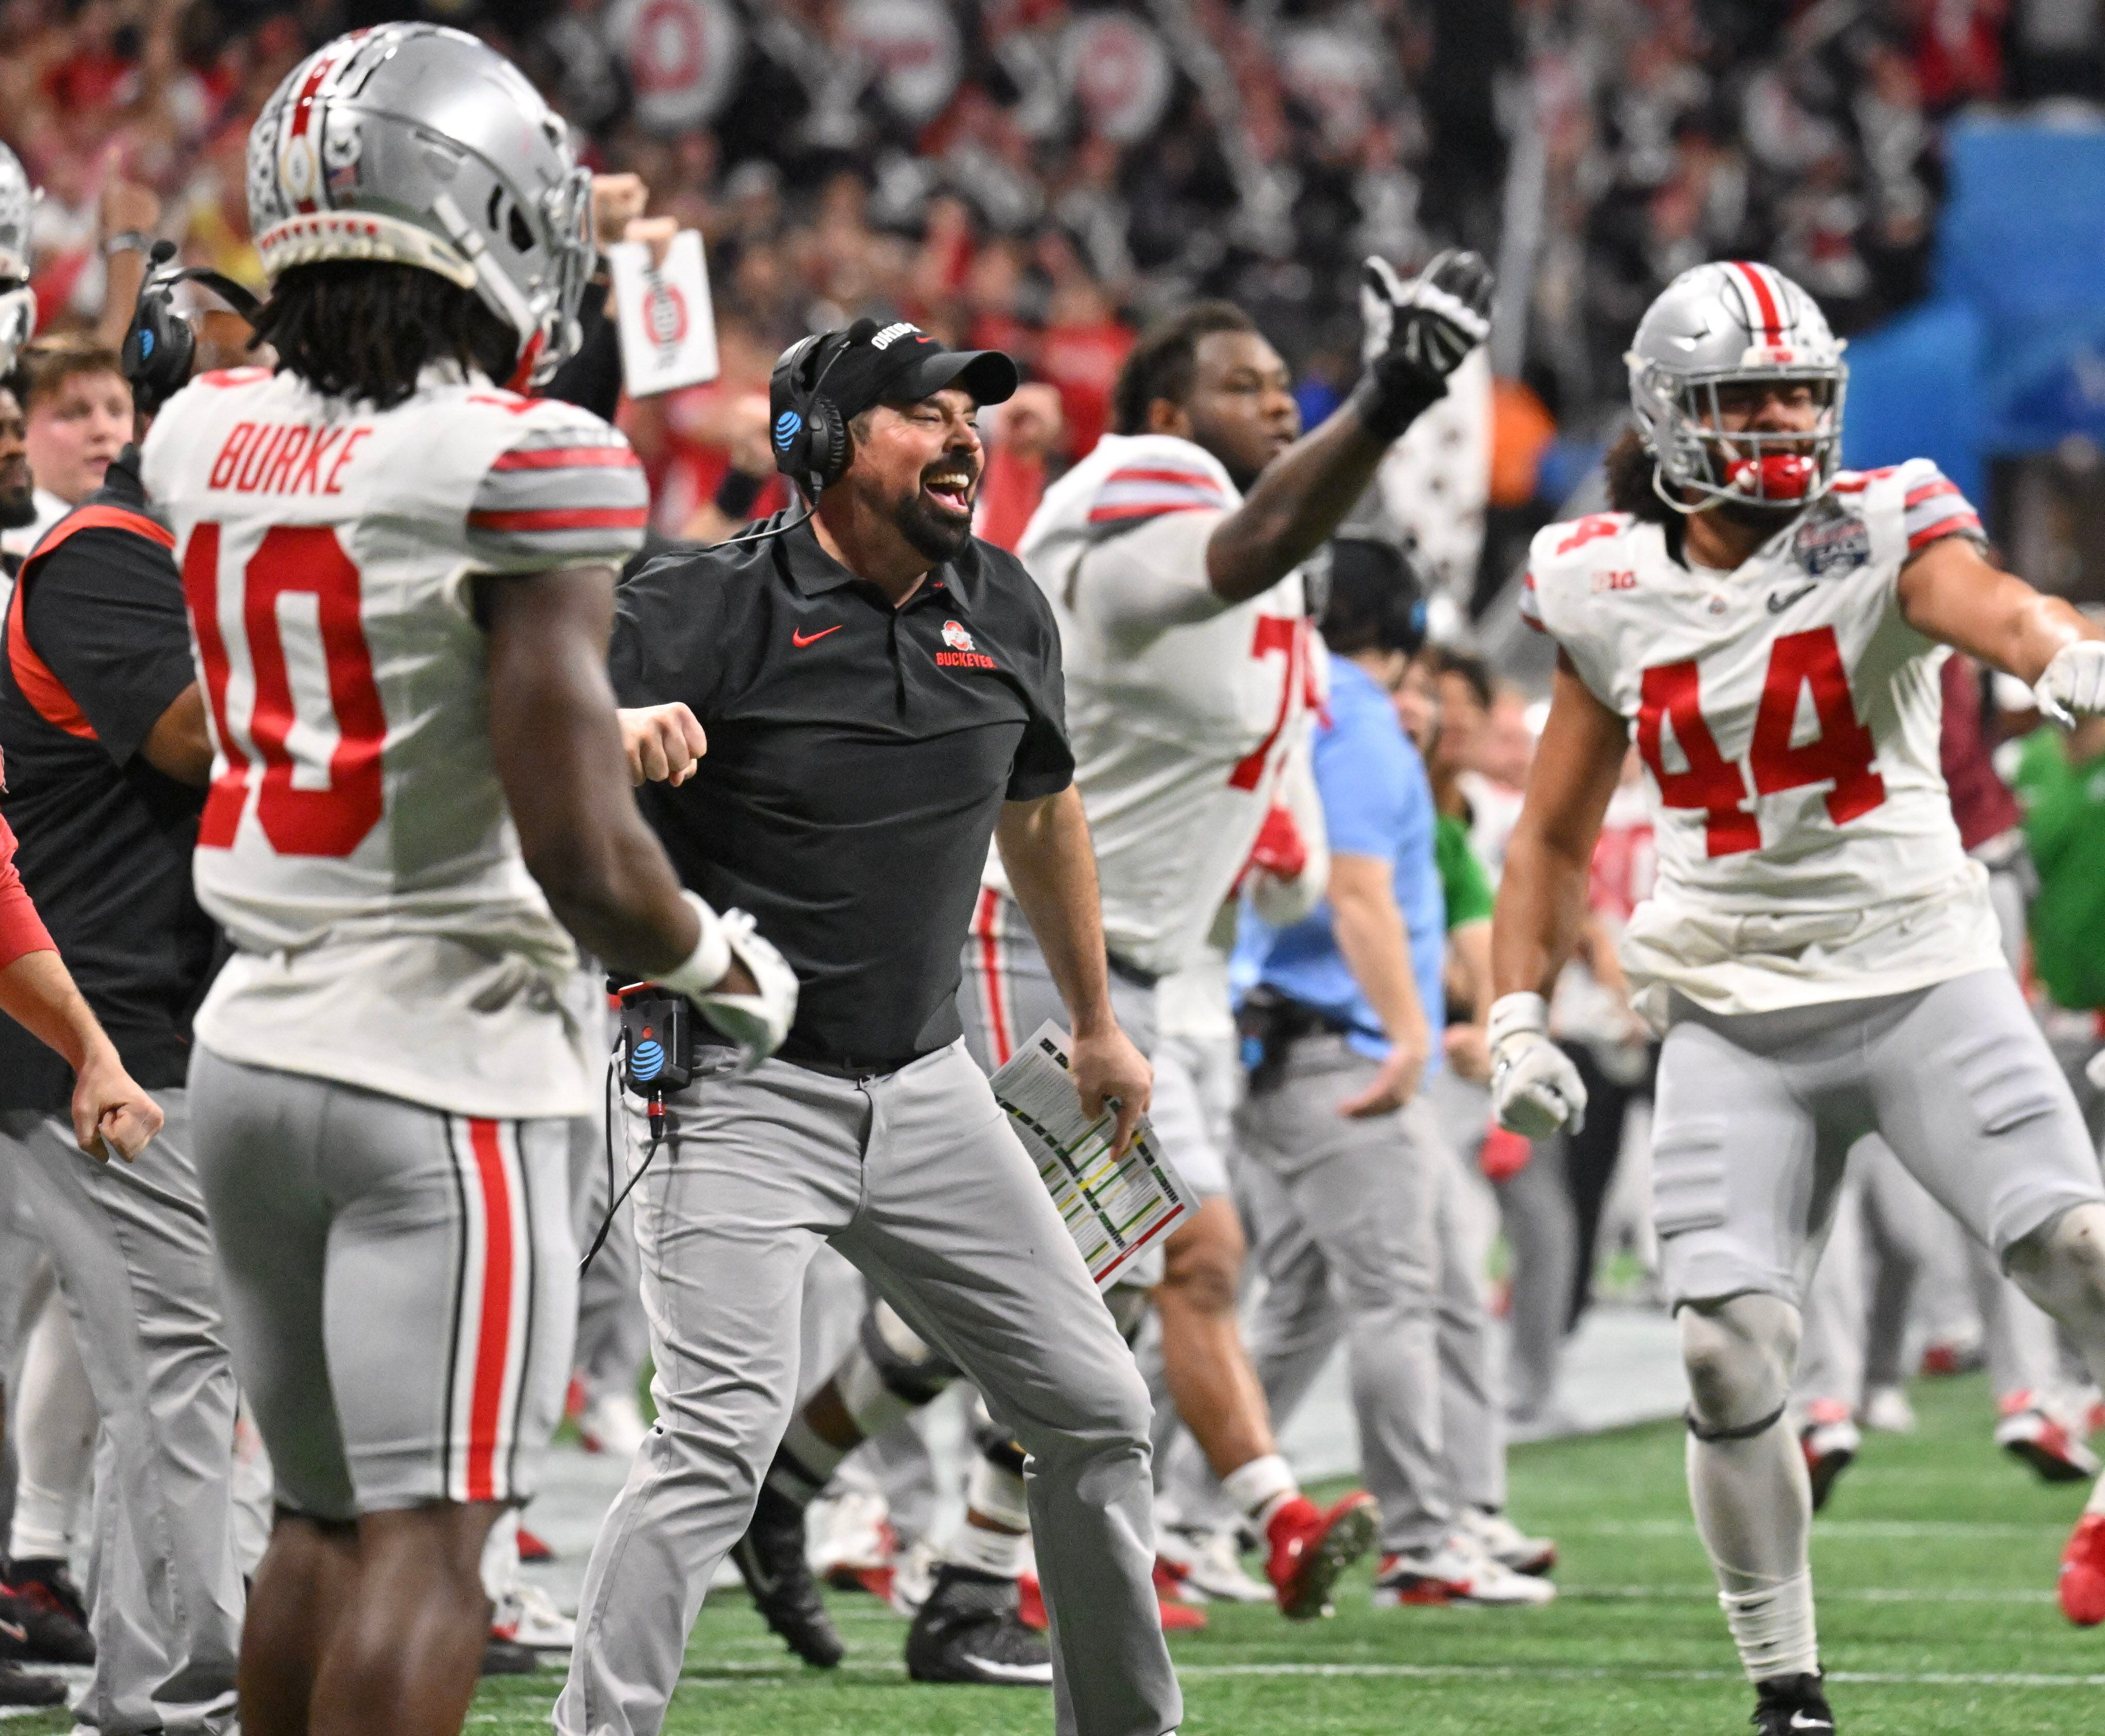 Ohio State coach Ryan Day demoralized by 42-41 loss to Georgia, 'we played  a helluva game'